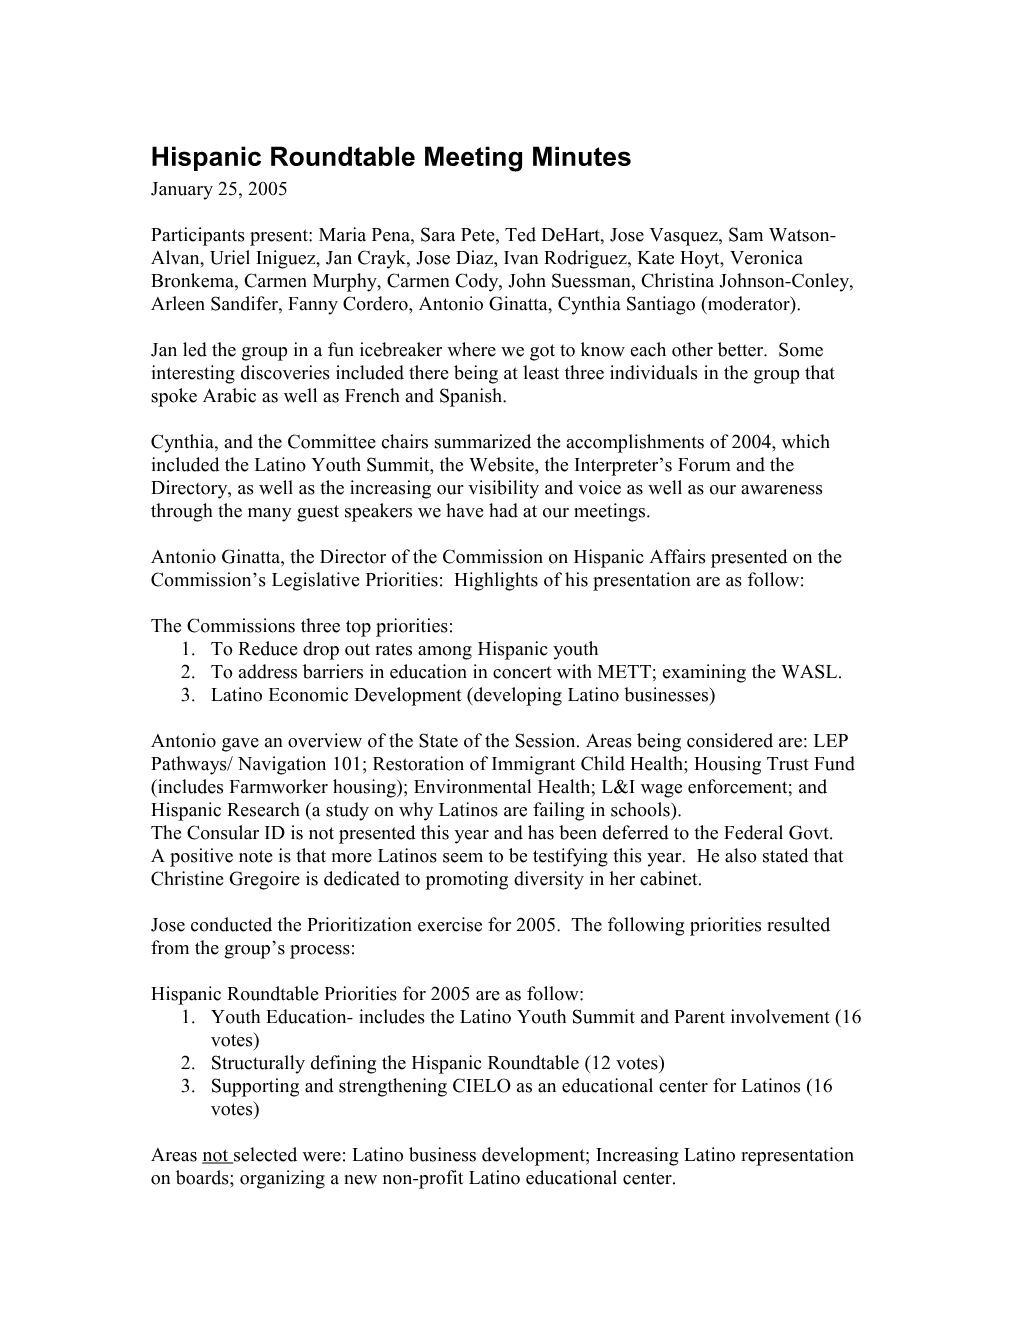 Hispanic Roundtable Meeting Minutes for January 25, 2005